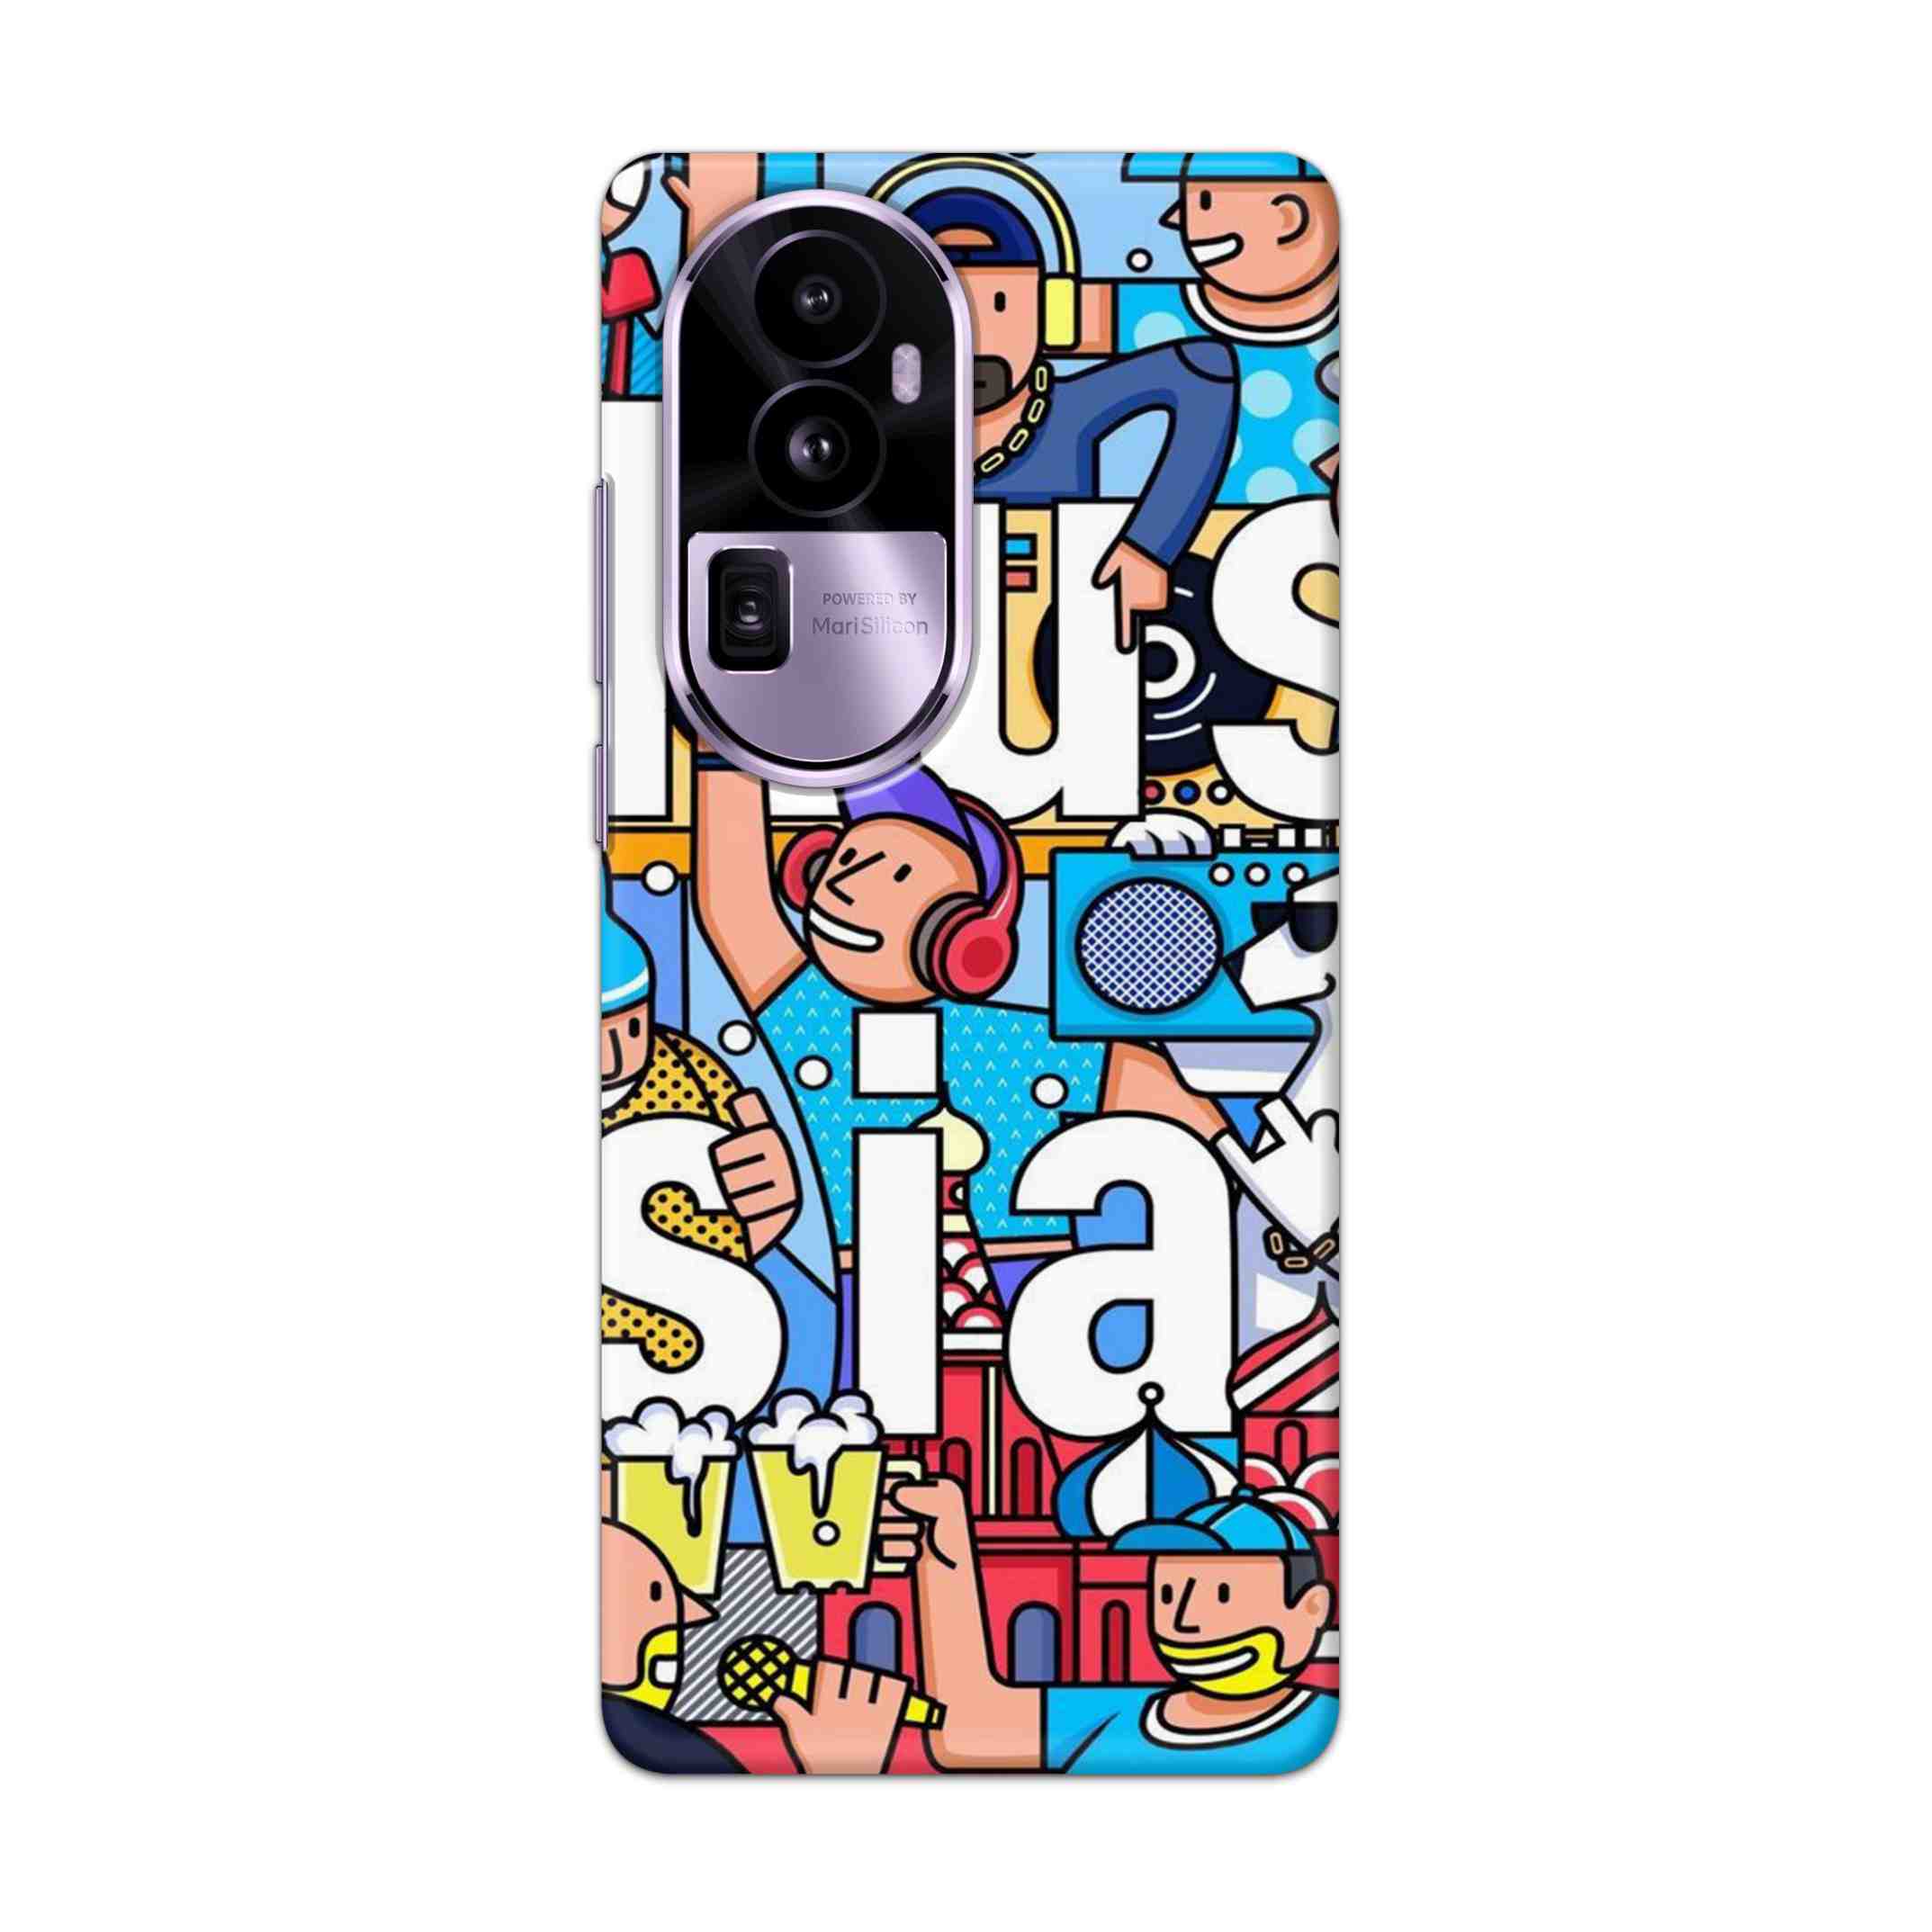 Buy Russia Hard Back Mobile Phone Case Cover For Oppo Reno 10 Pro Plus Online